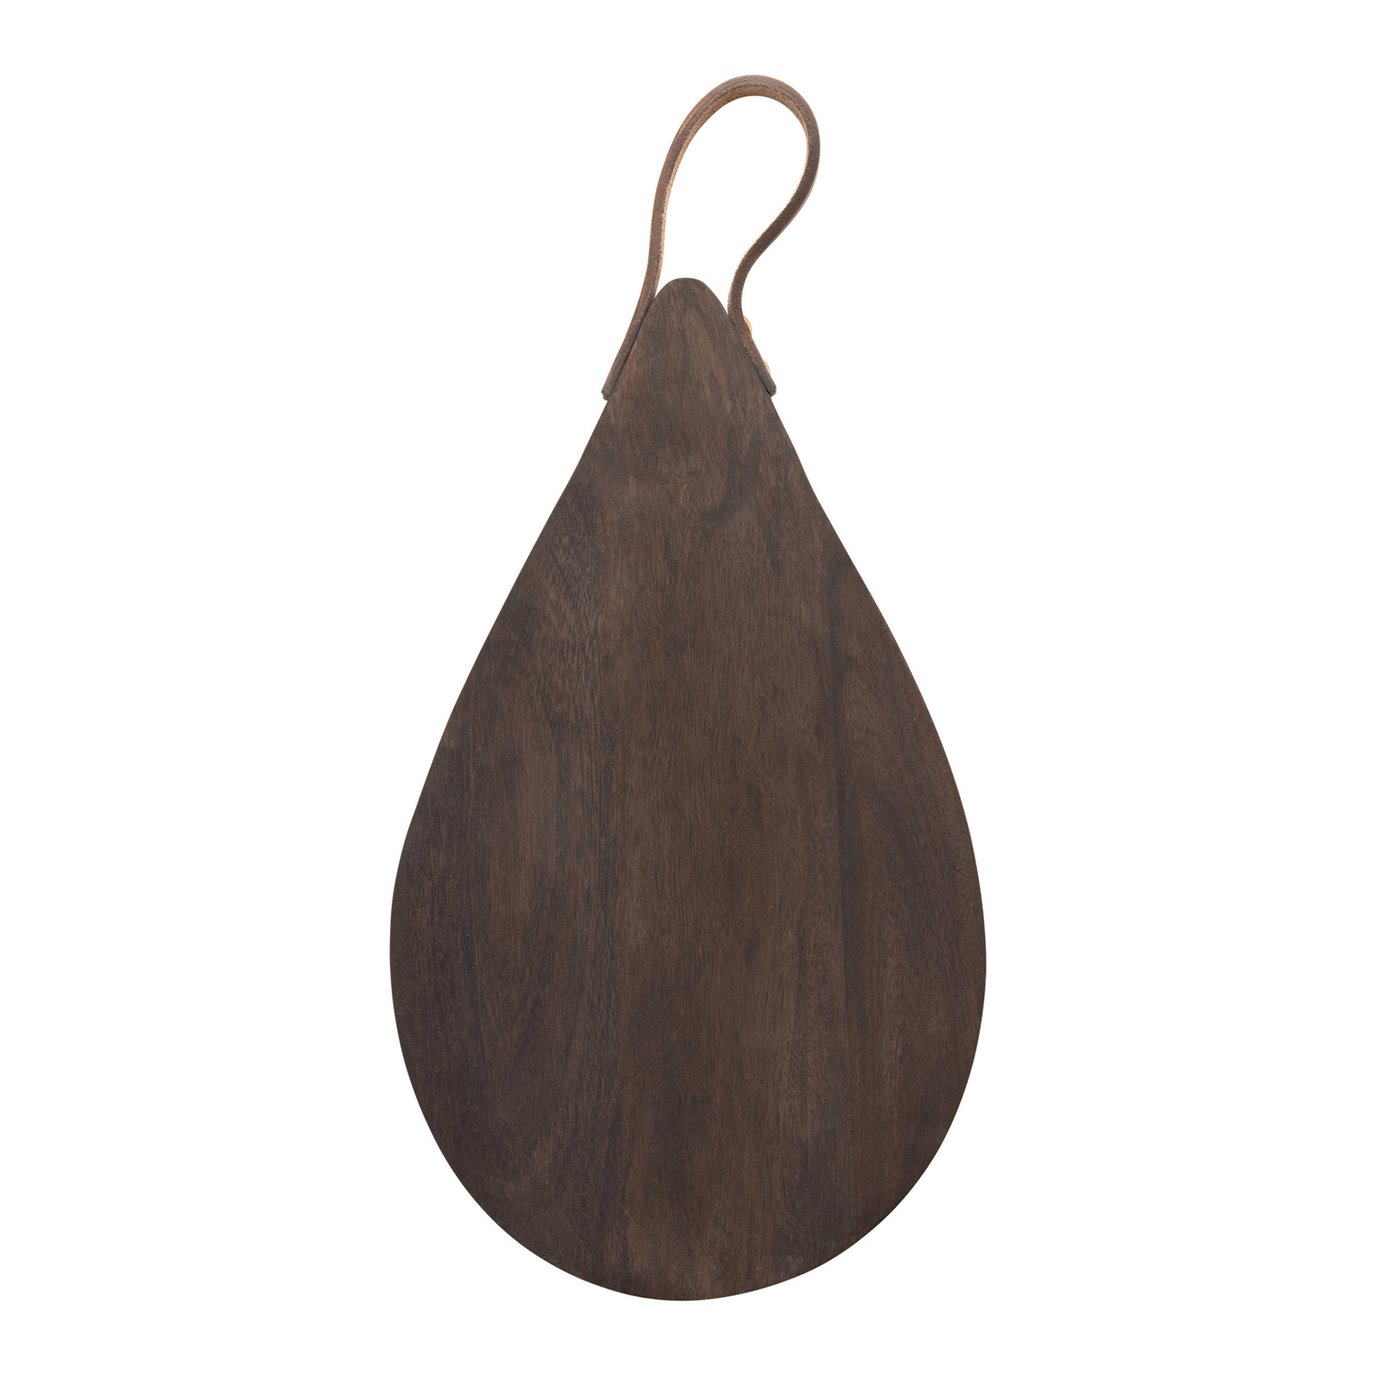 Mango Wood Cheese/Cutting Board with Leather Handle, Espresso Finish